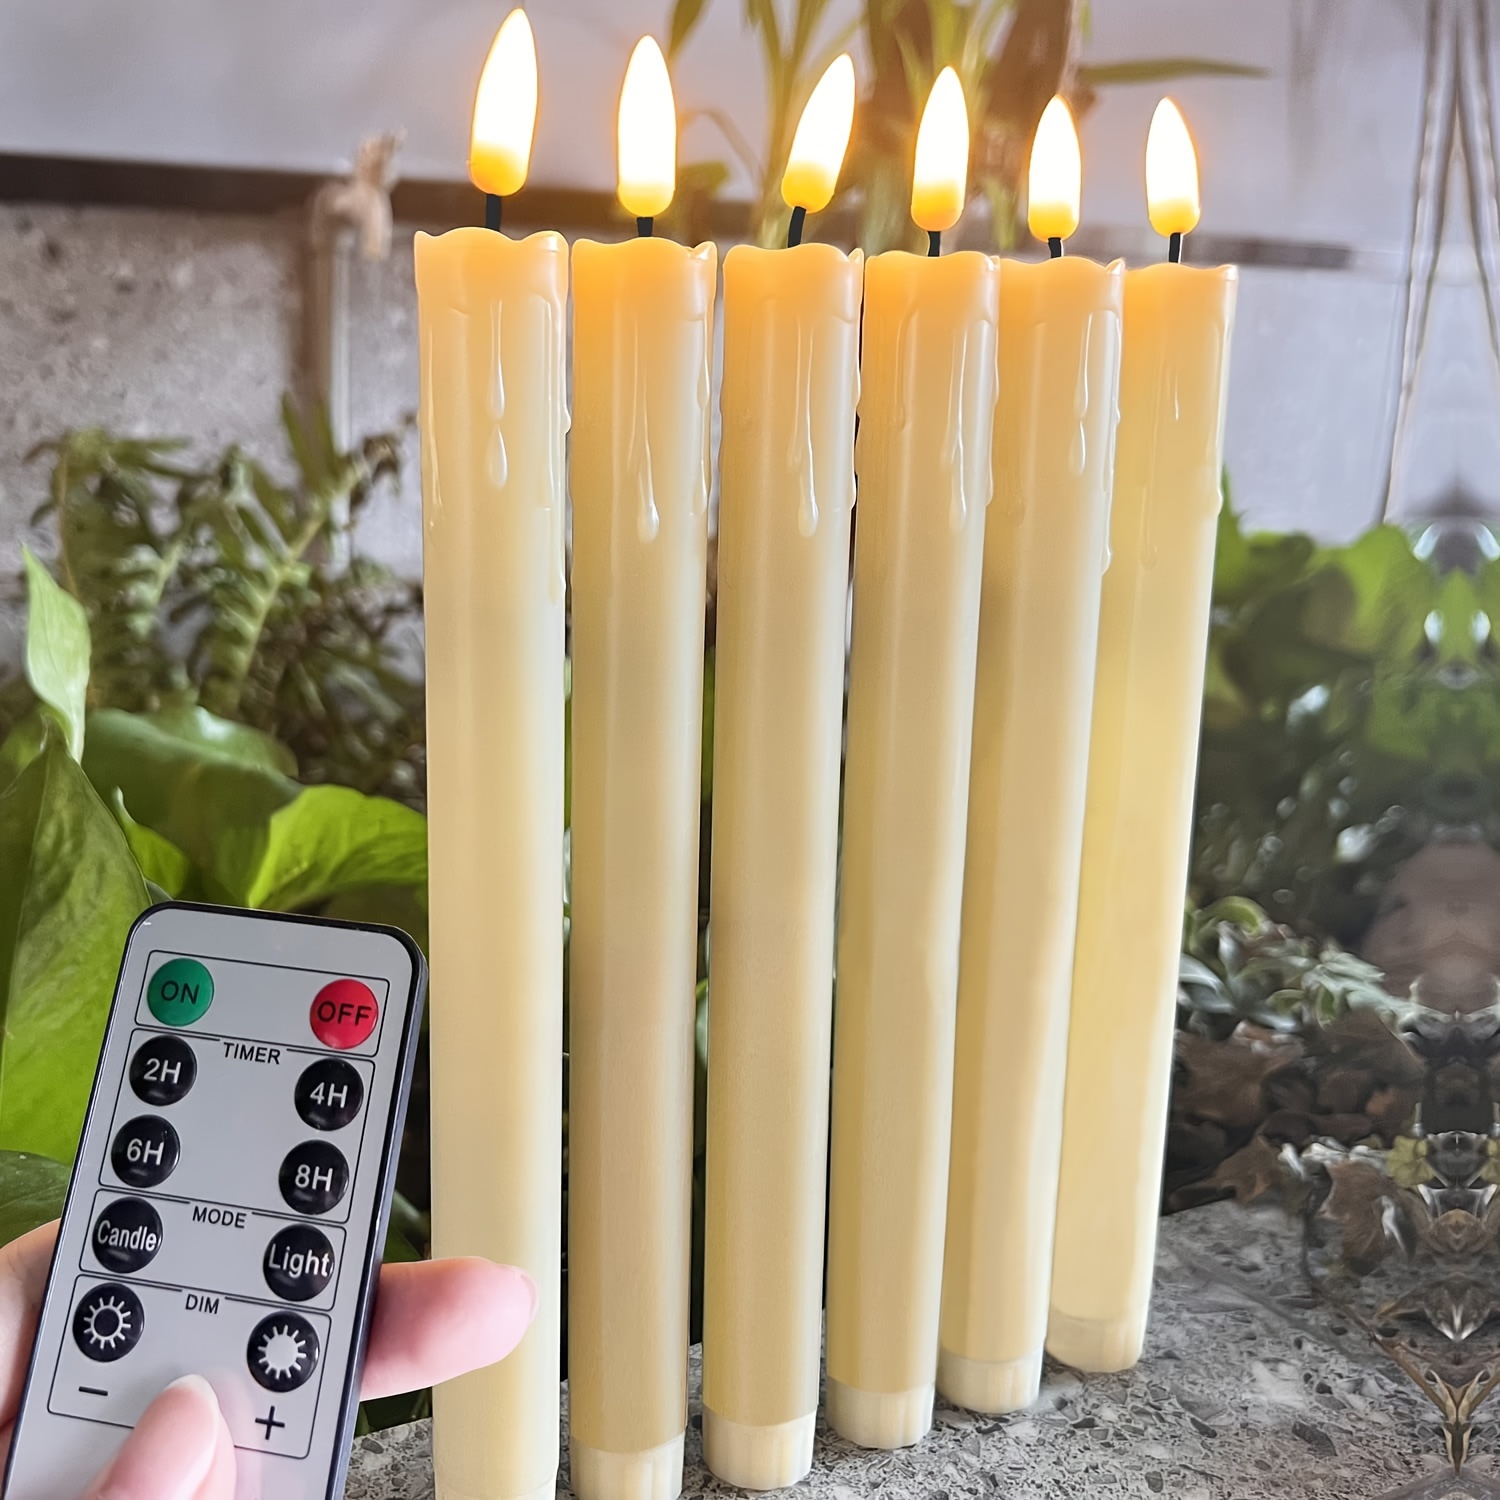 

Lulubro 3d Led Flameless Flickering Battery Operated Powered Taper Candles With Remote, Electric Timer Fake Candle Like Real Wax, Realistic Candlesticks For Valentine's Day Table/windows/wedding Decor